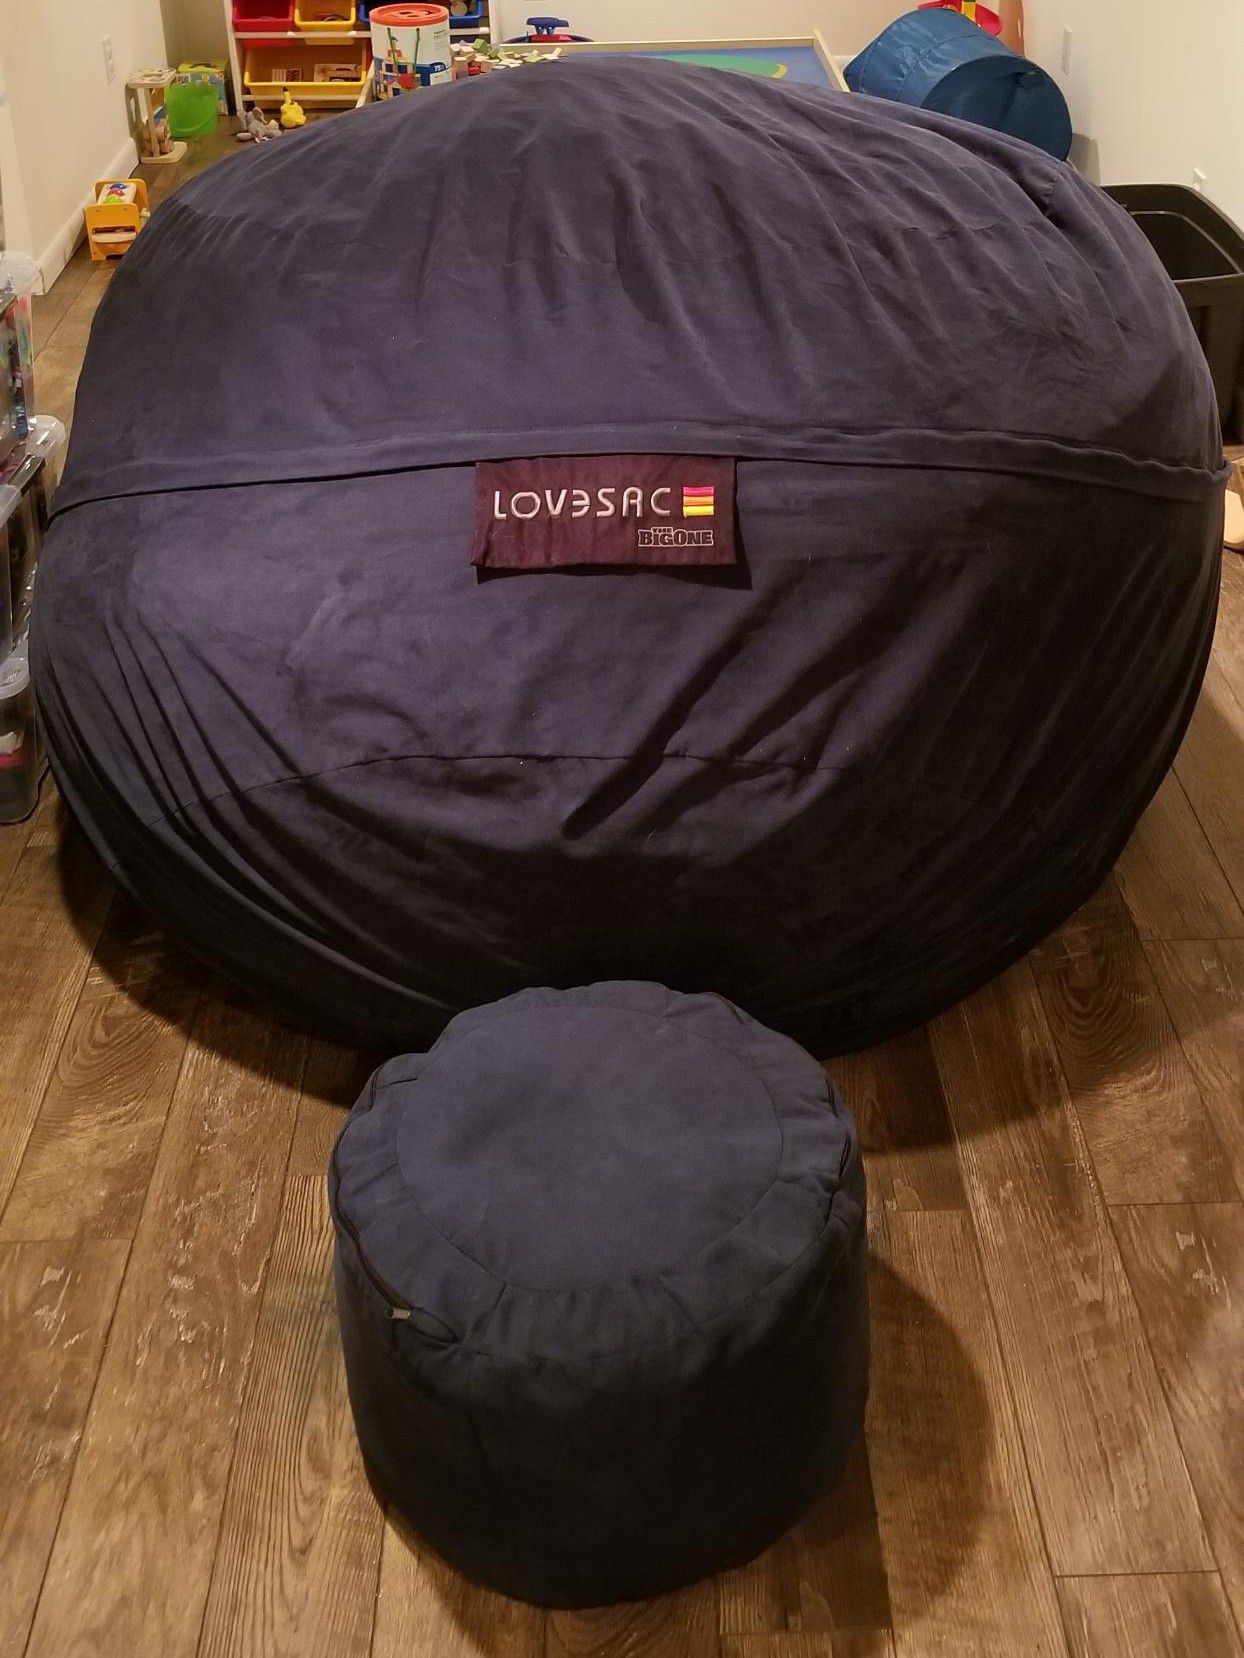 Lovesac Bigone Giant Bean Bag Chair Plus Squattoman Footstool (And  Additional Sport Utility Cover) For Sale In Evans, Co - Offerup